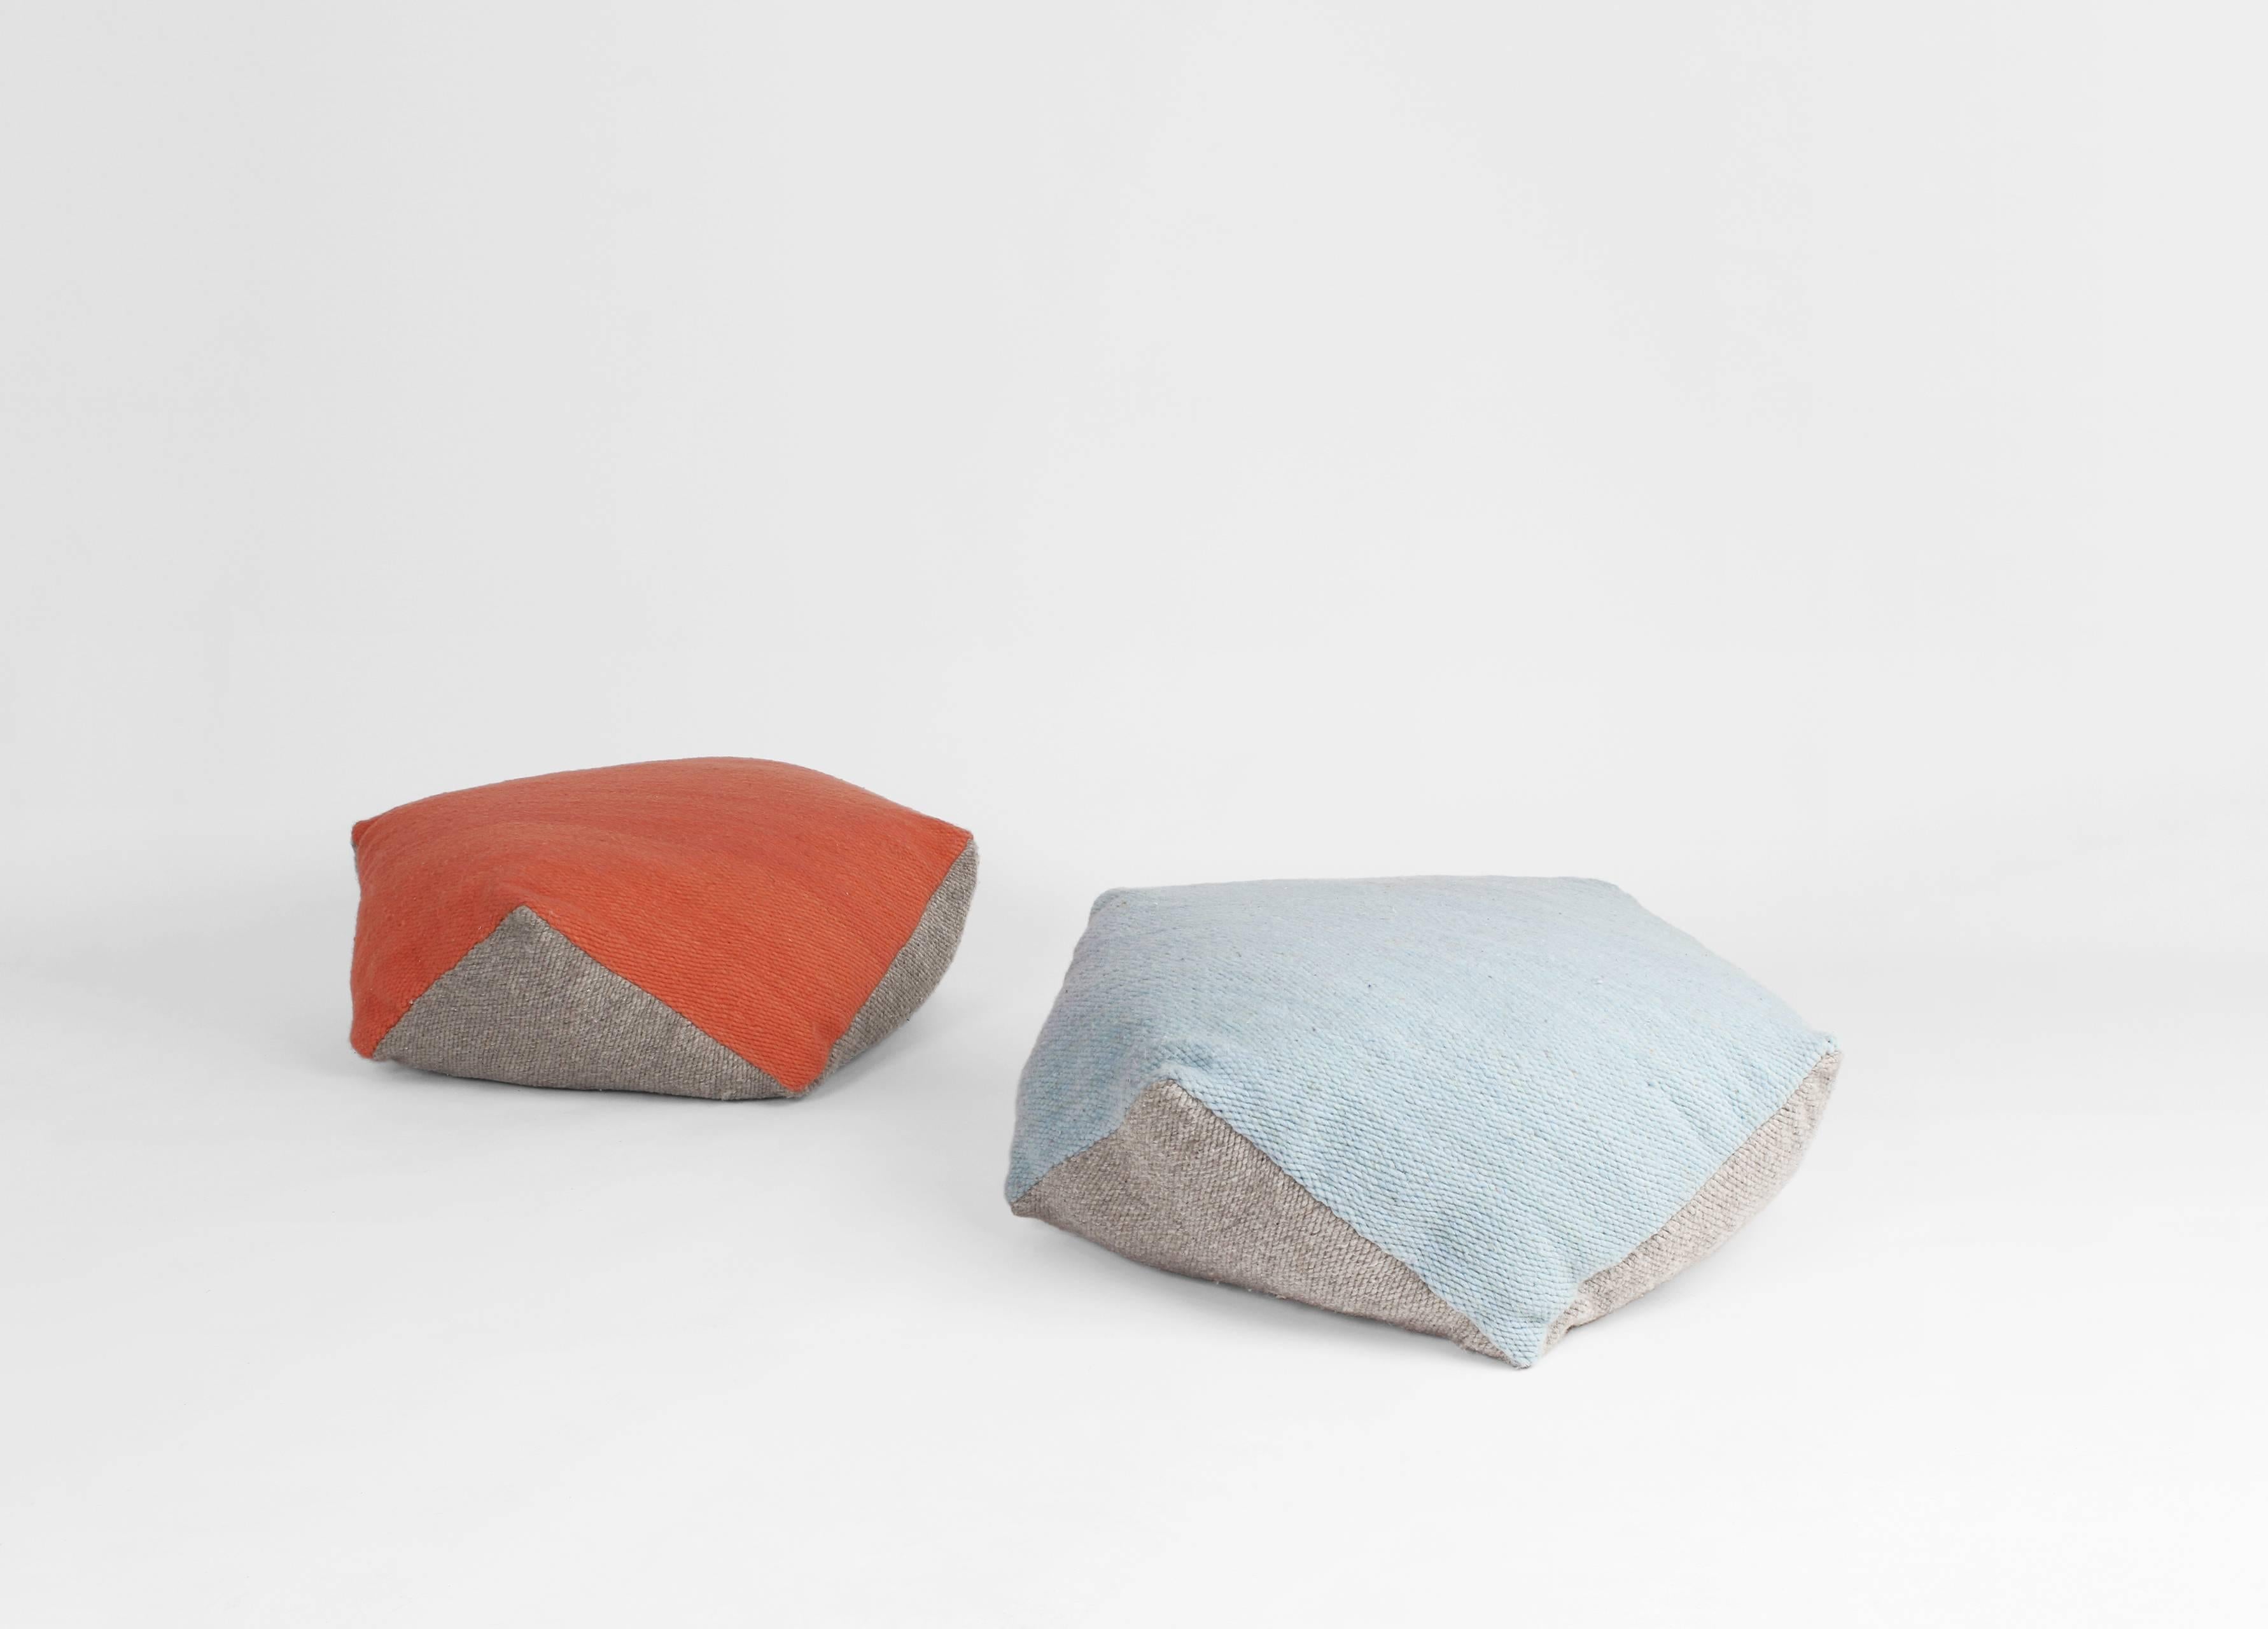 “Inspired by the softness of the wool and the possibilities to create volumes through planes hand woven in pedal loom we designed this comfortable pouf with its versatile shape and the hand dyeing of the wool that allows to make different